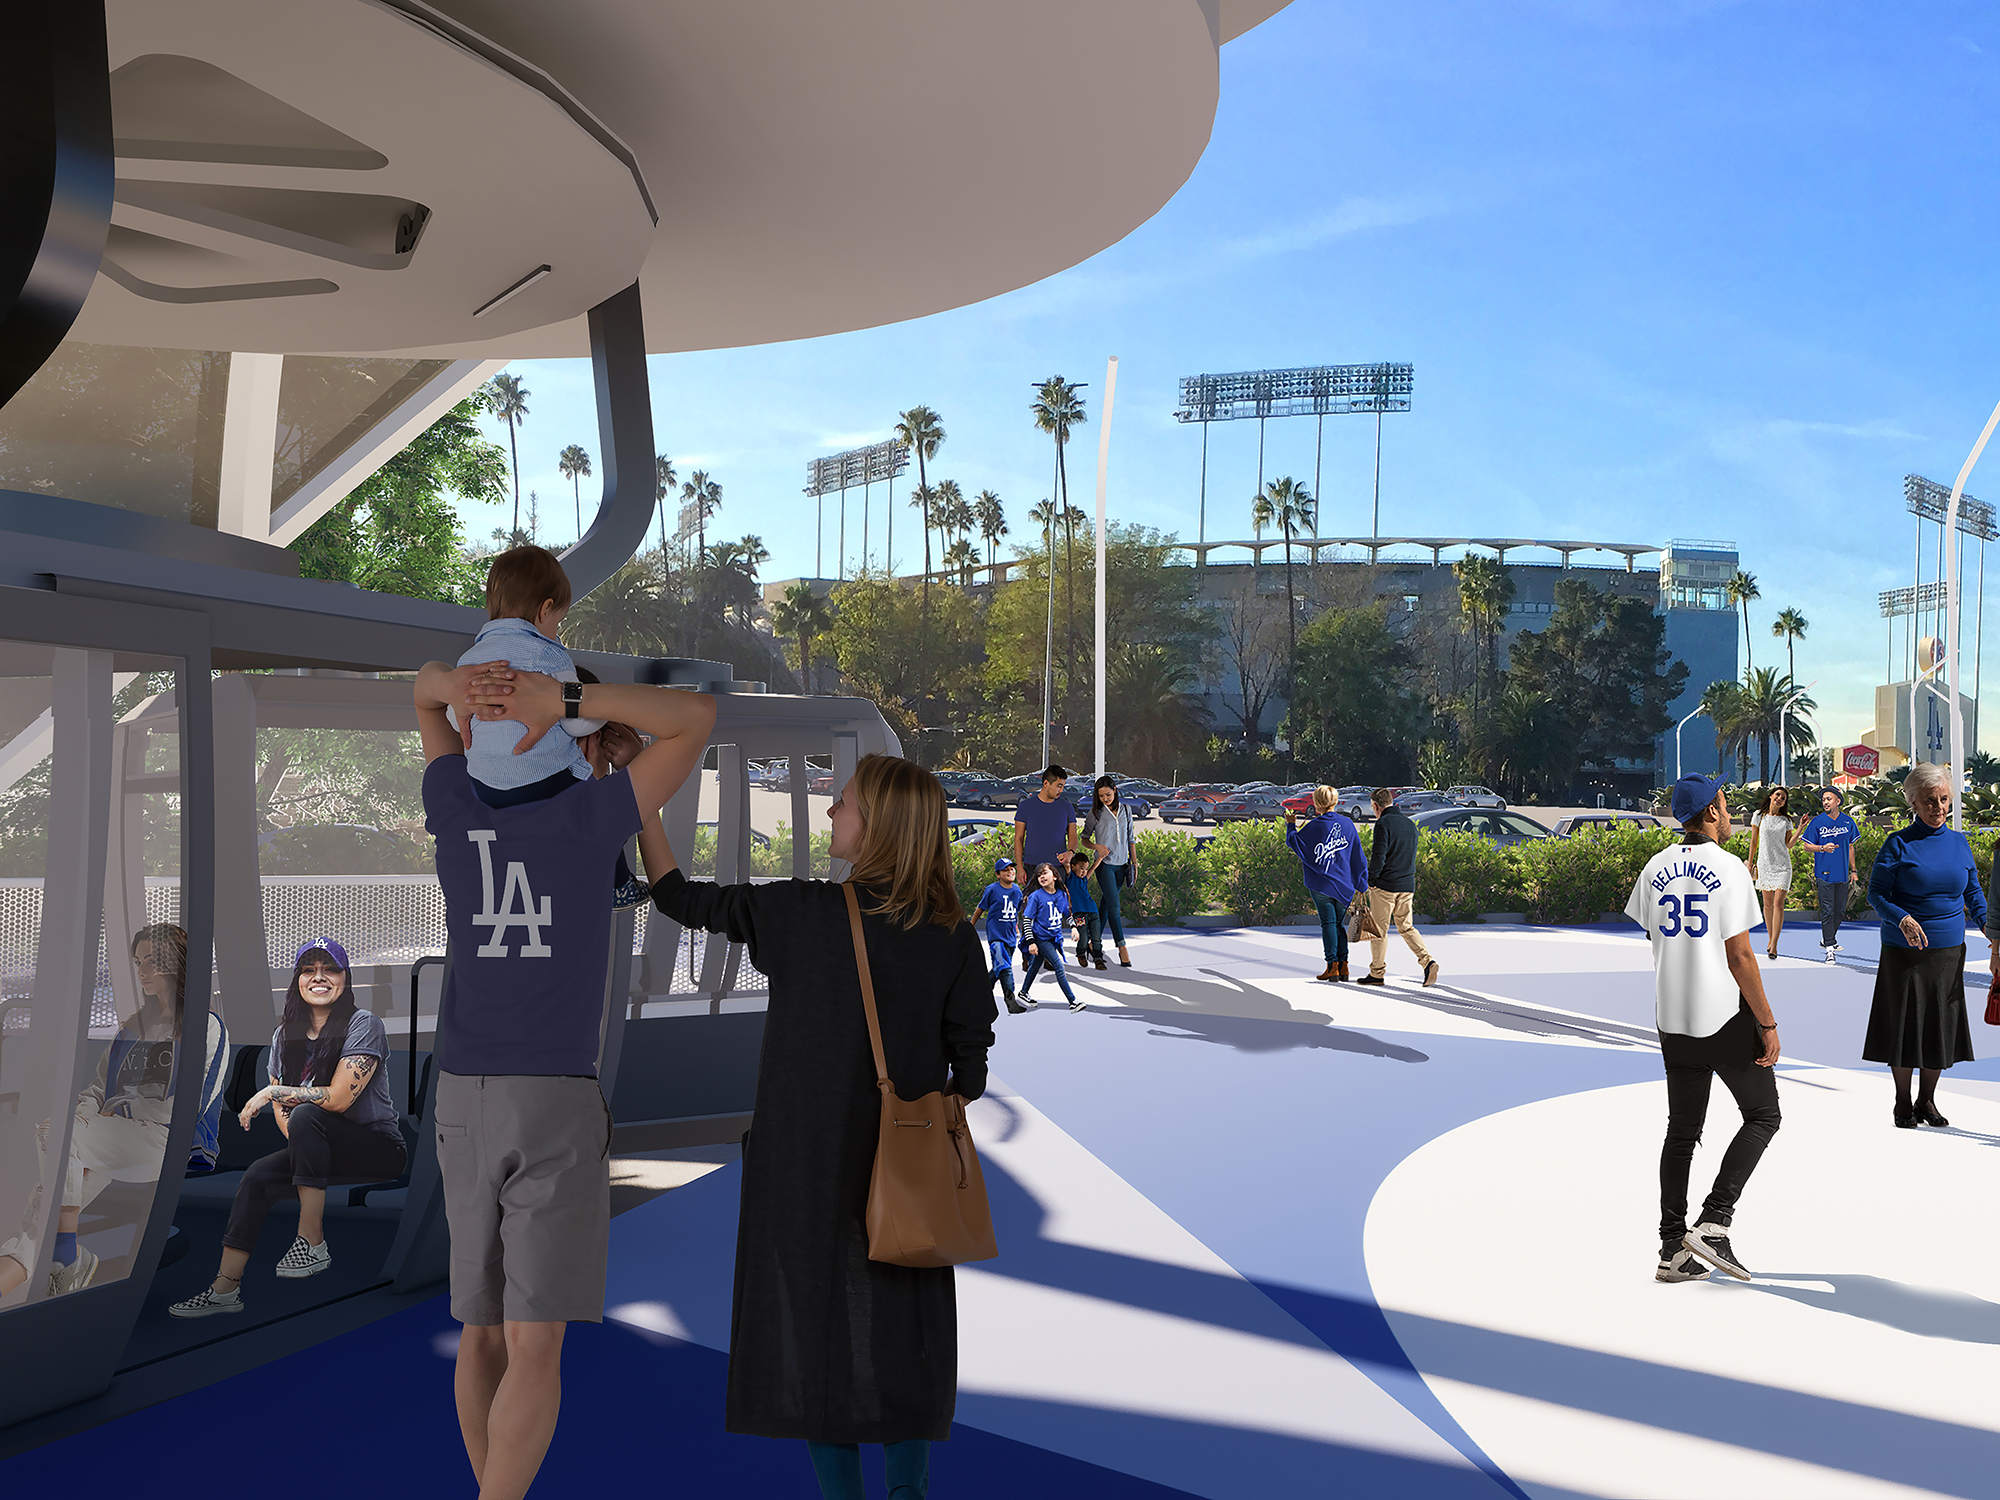 It would take seven minutes to travel to complete the 1.2 mile journey from Union Station to the Dodger Stadium on the proposed gondola ©Los Angeles County Metropolitan Transportation Authority